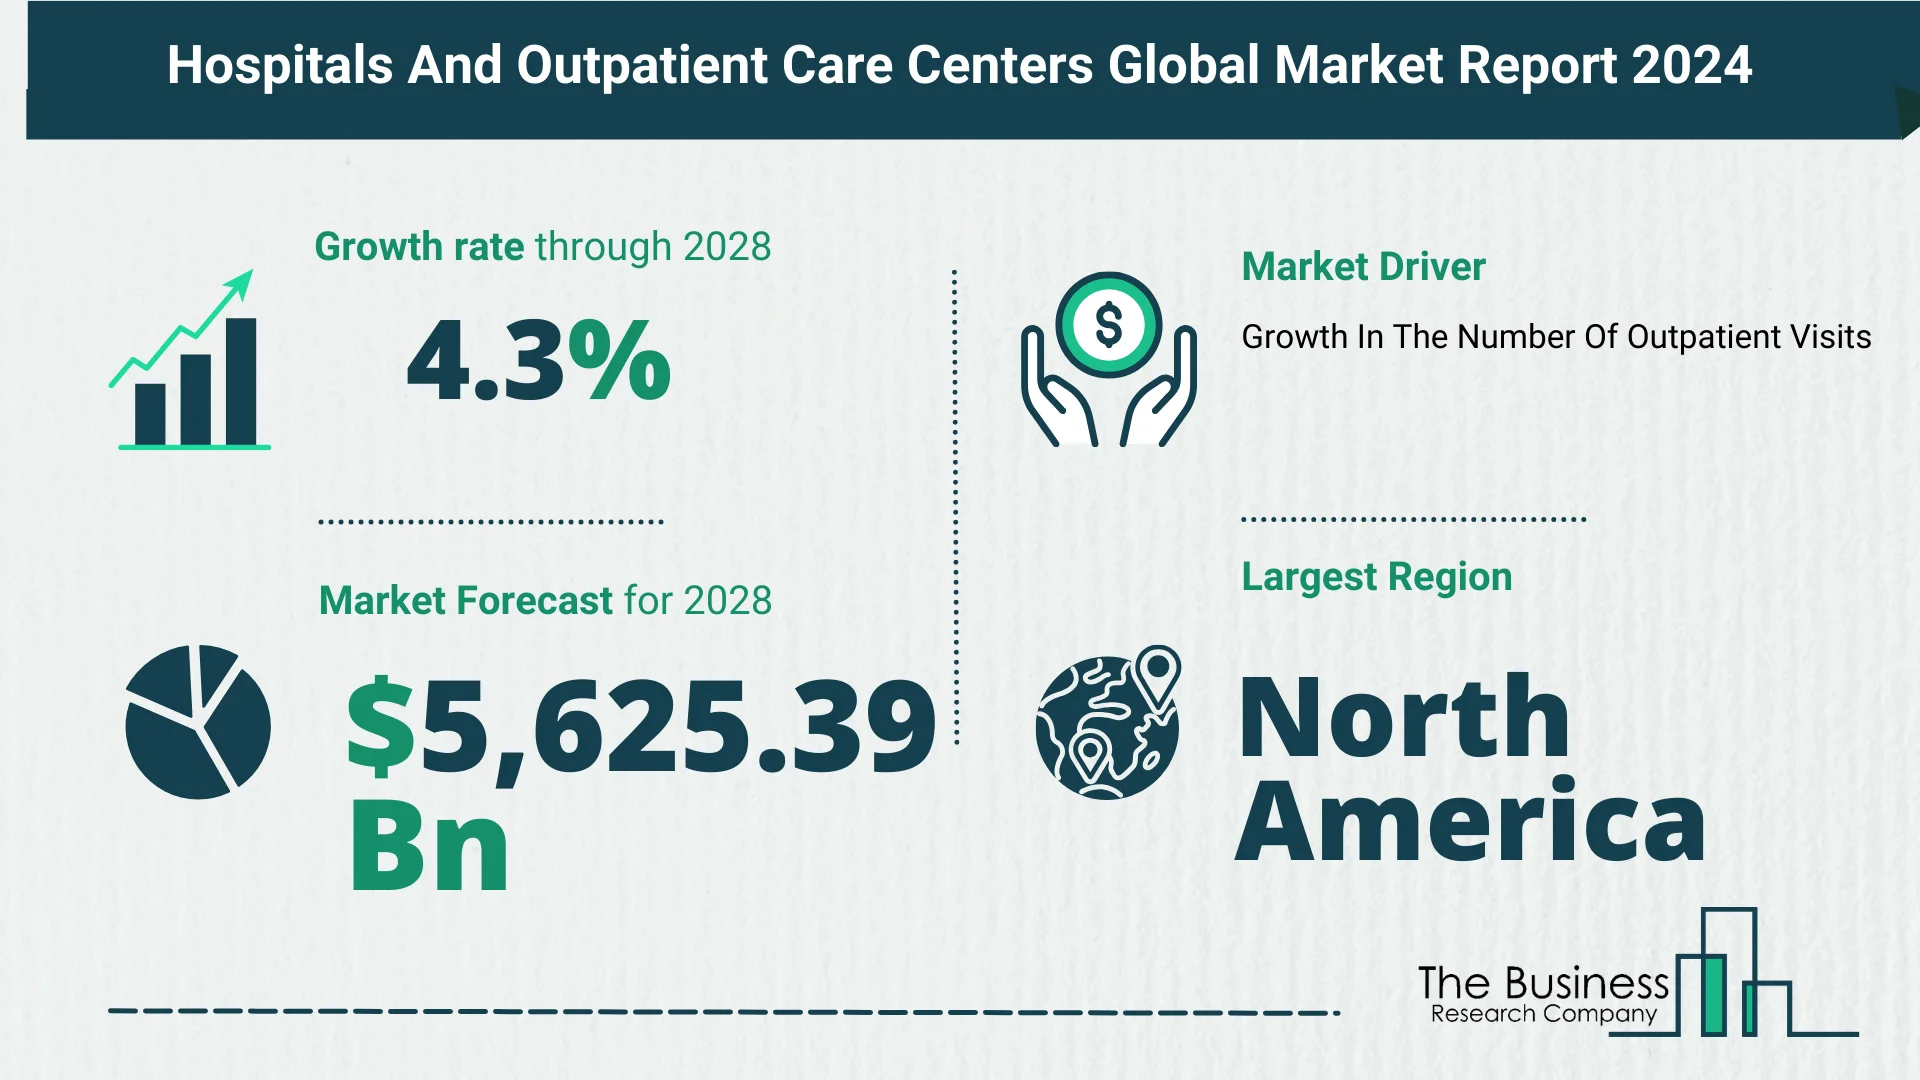 Global Hospitals And Outpatient Care Centers Market